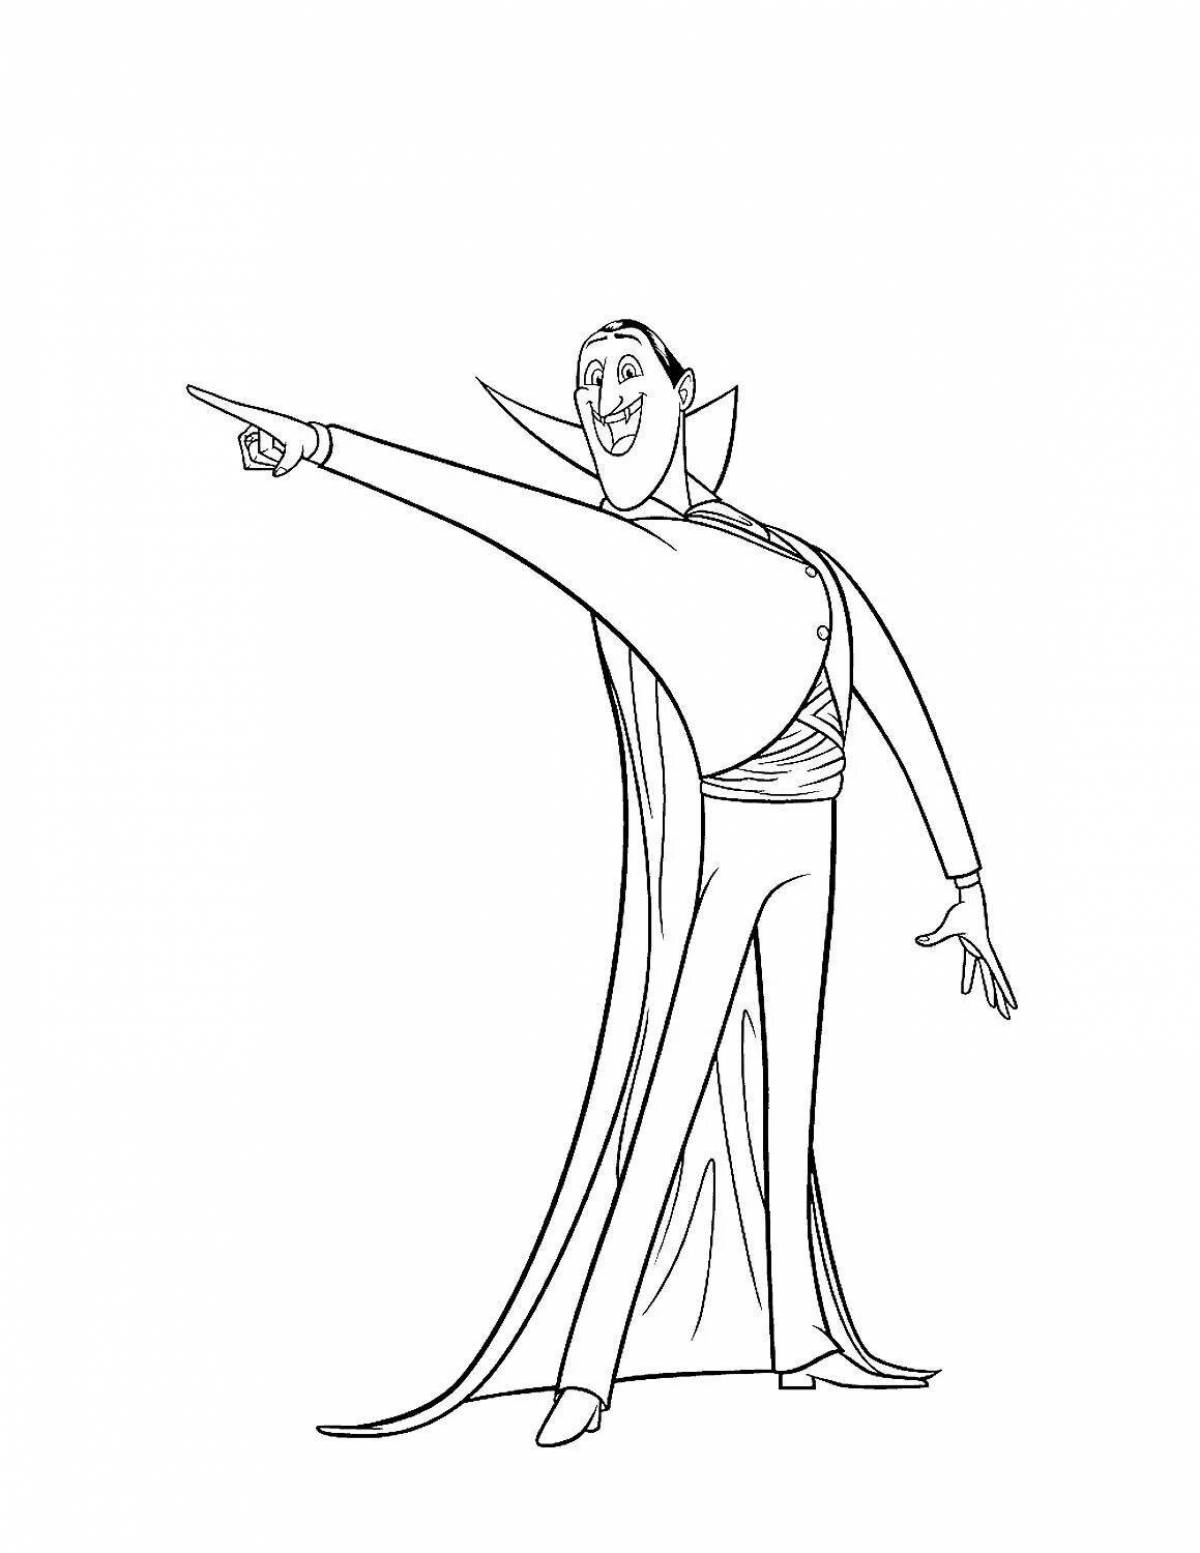 Count Dracula's unnerving coloring page